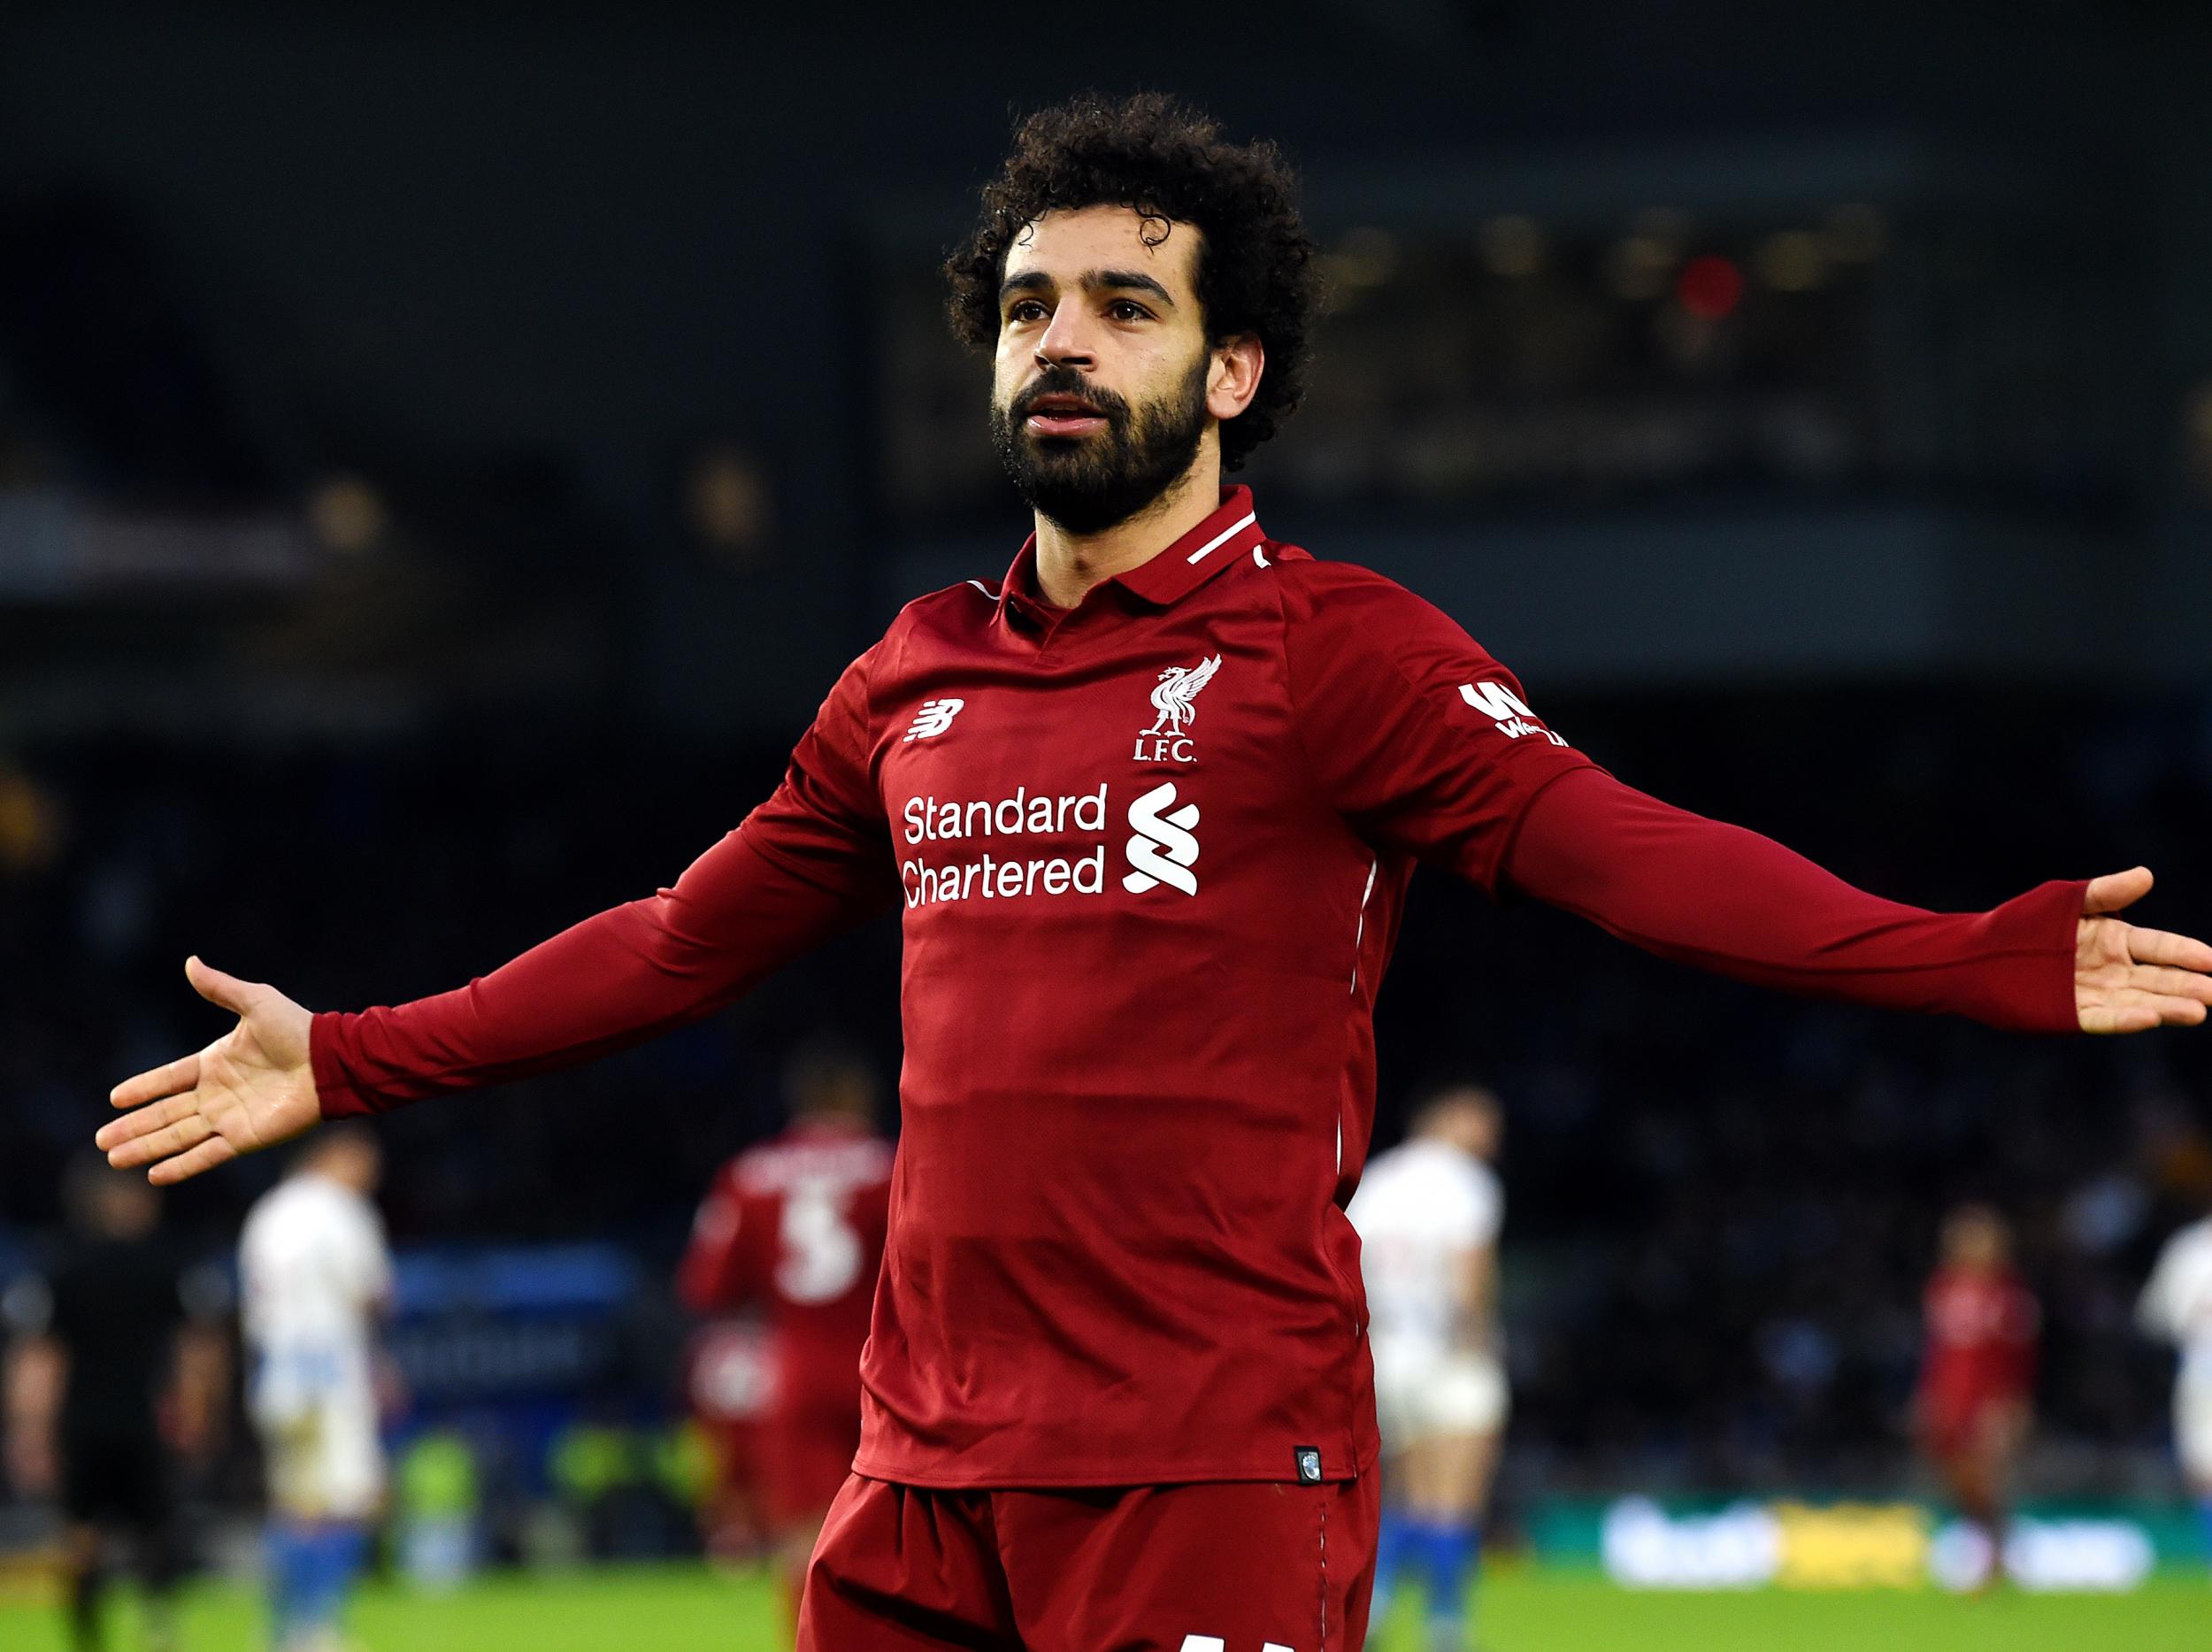 Liverpool Premier League fixtures 2019/20 revealed Full list for new